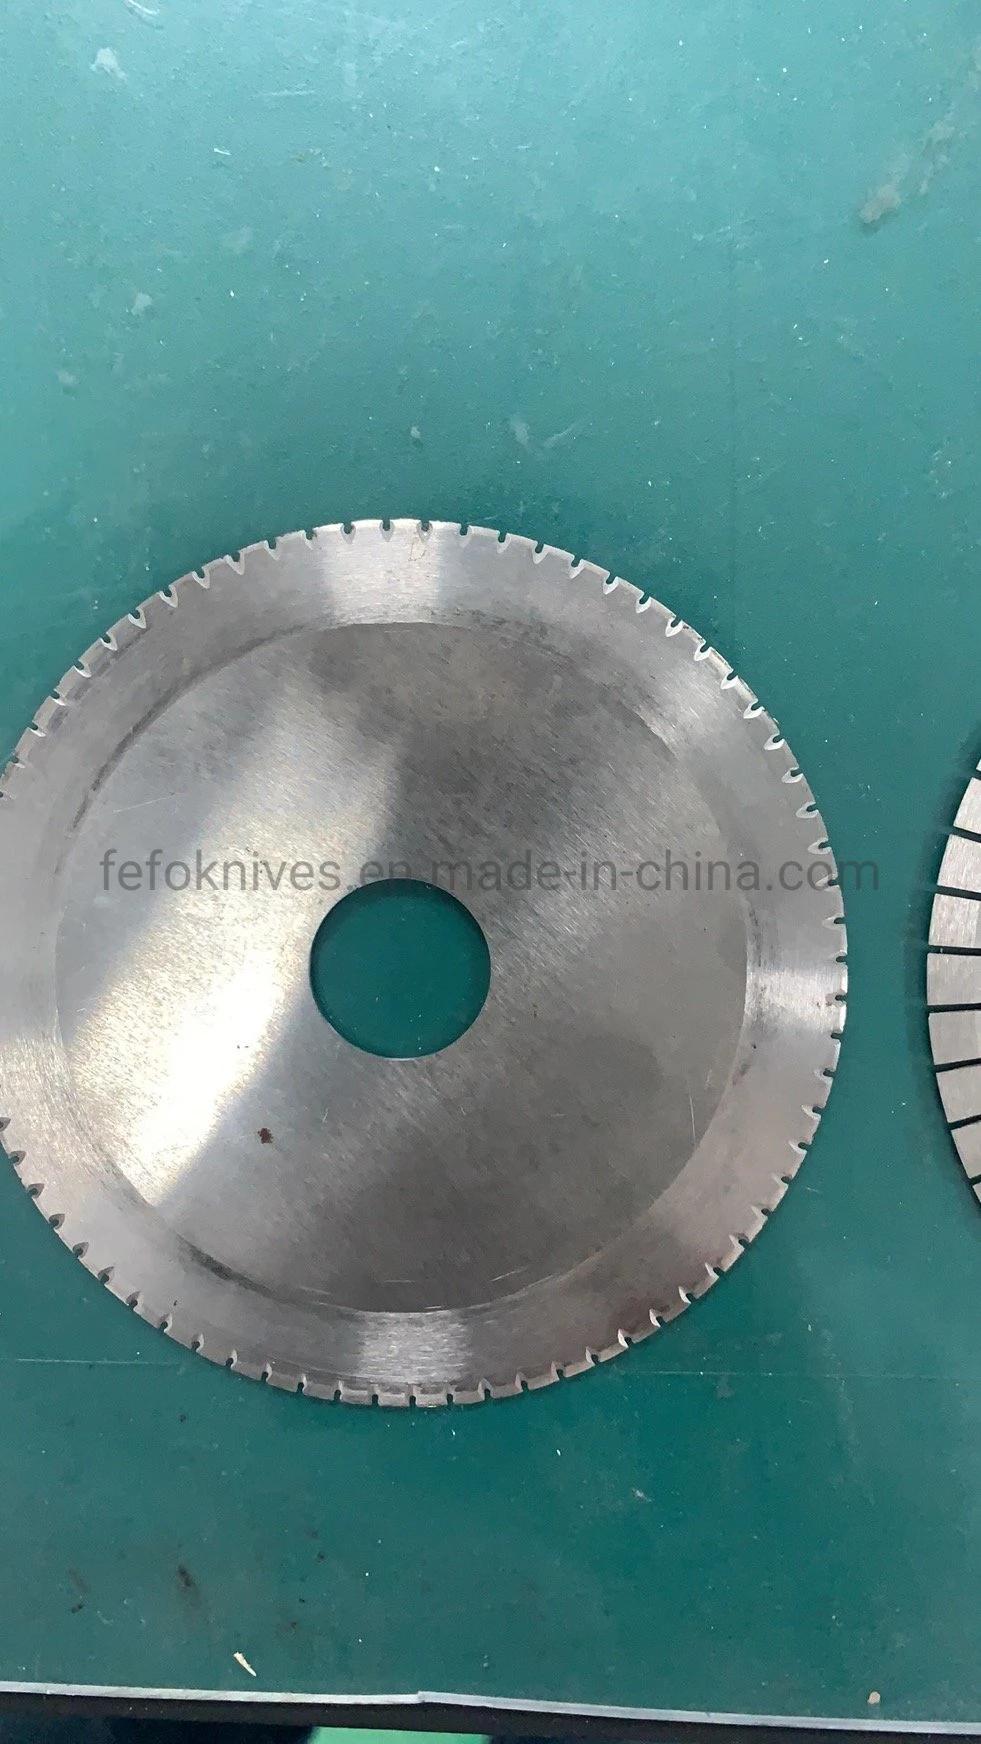 China Manufacturer of Straight and Circular Replacement Blades for Rubber and Tire Industry